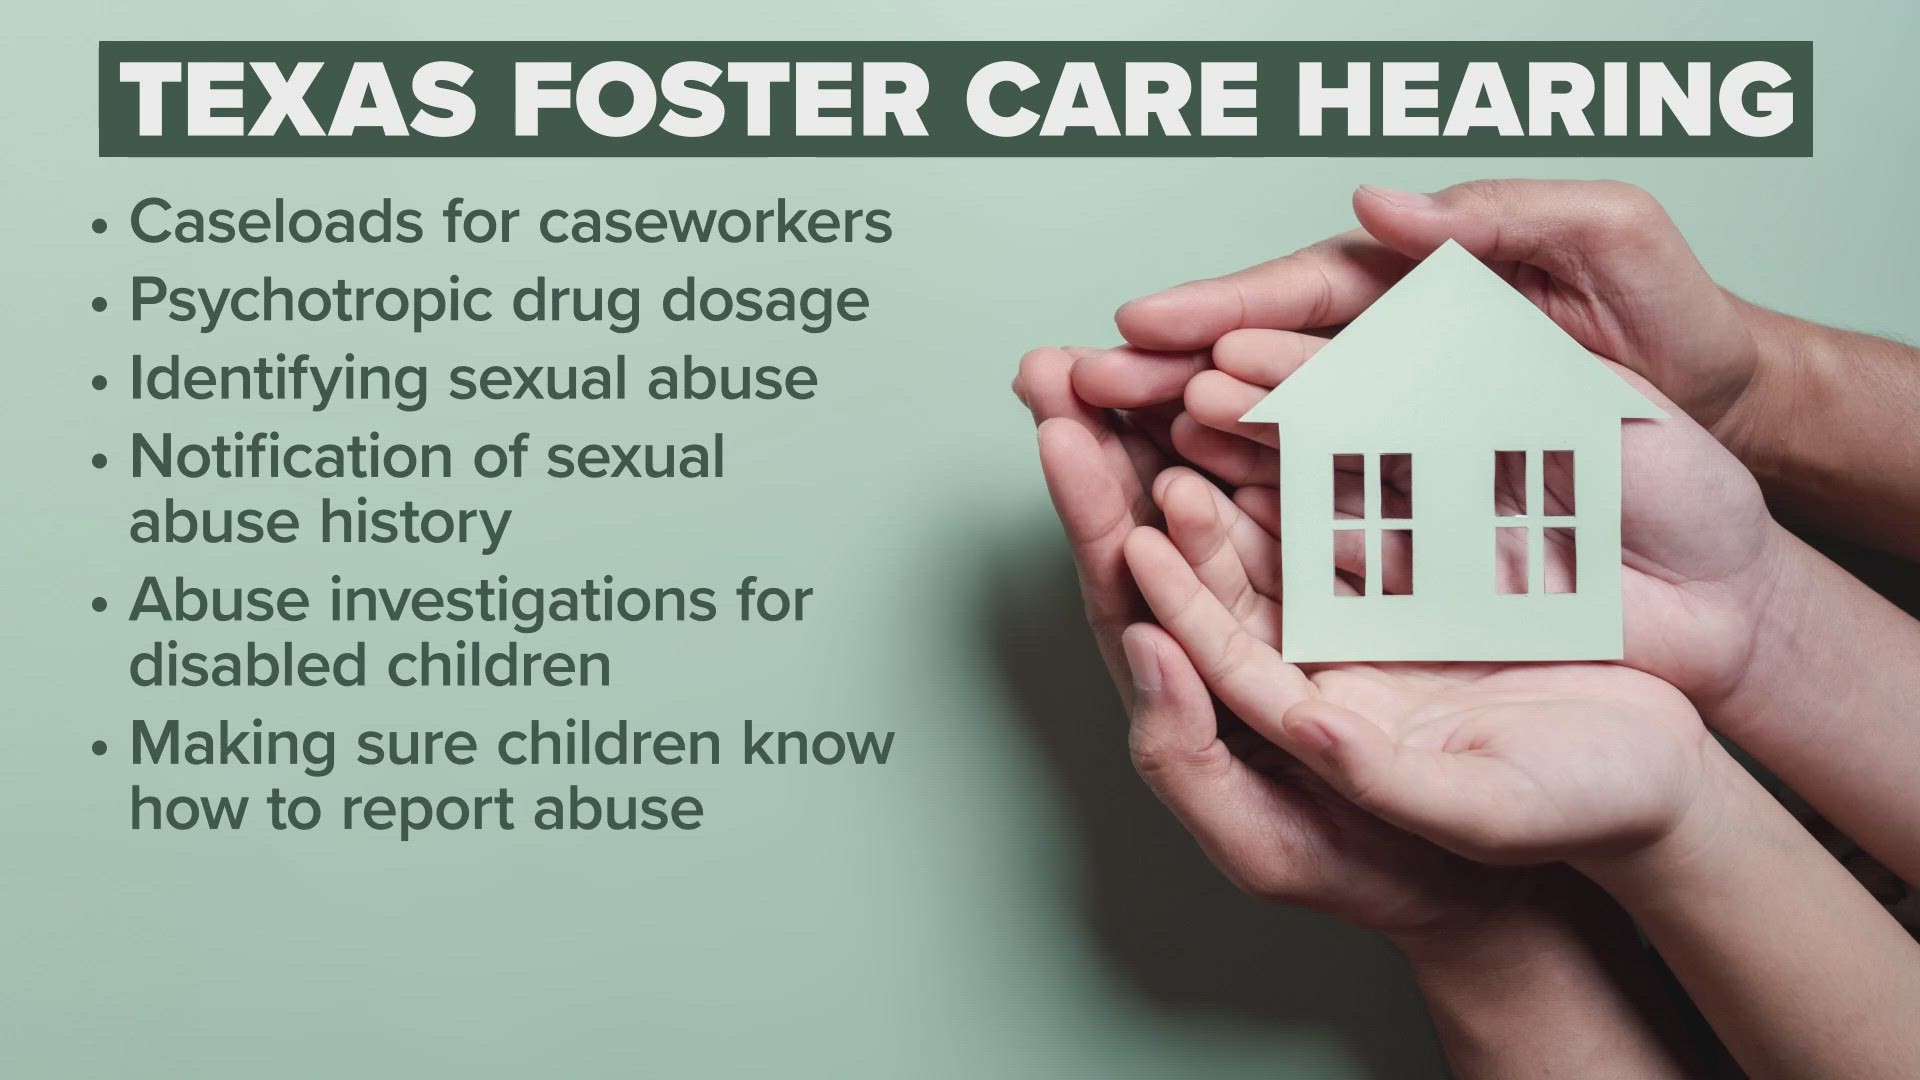 U.S. District Judge Janis Jack will decide whether to impose penalties on state agencies responsible for Texas' foster care system.